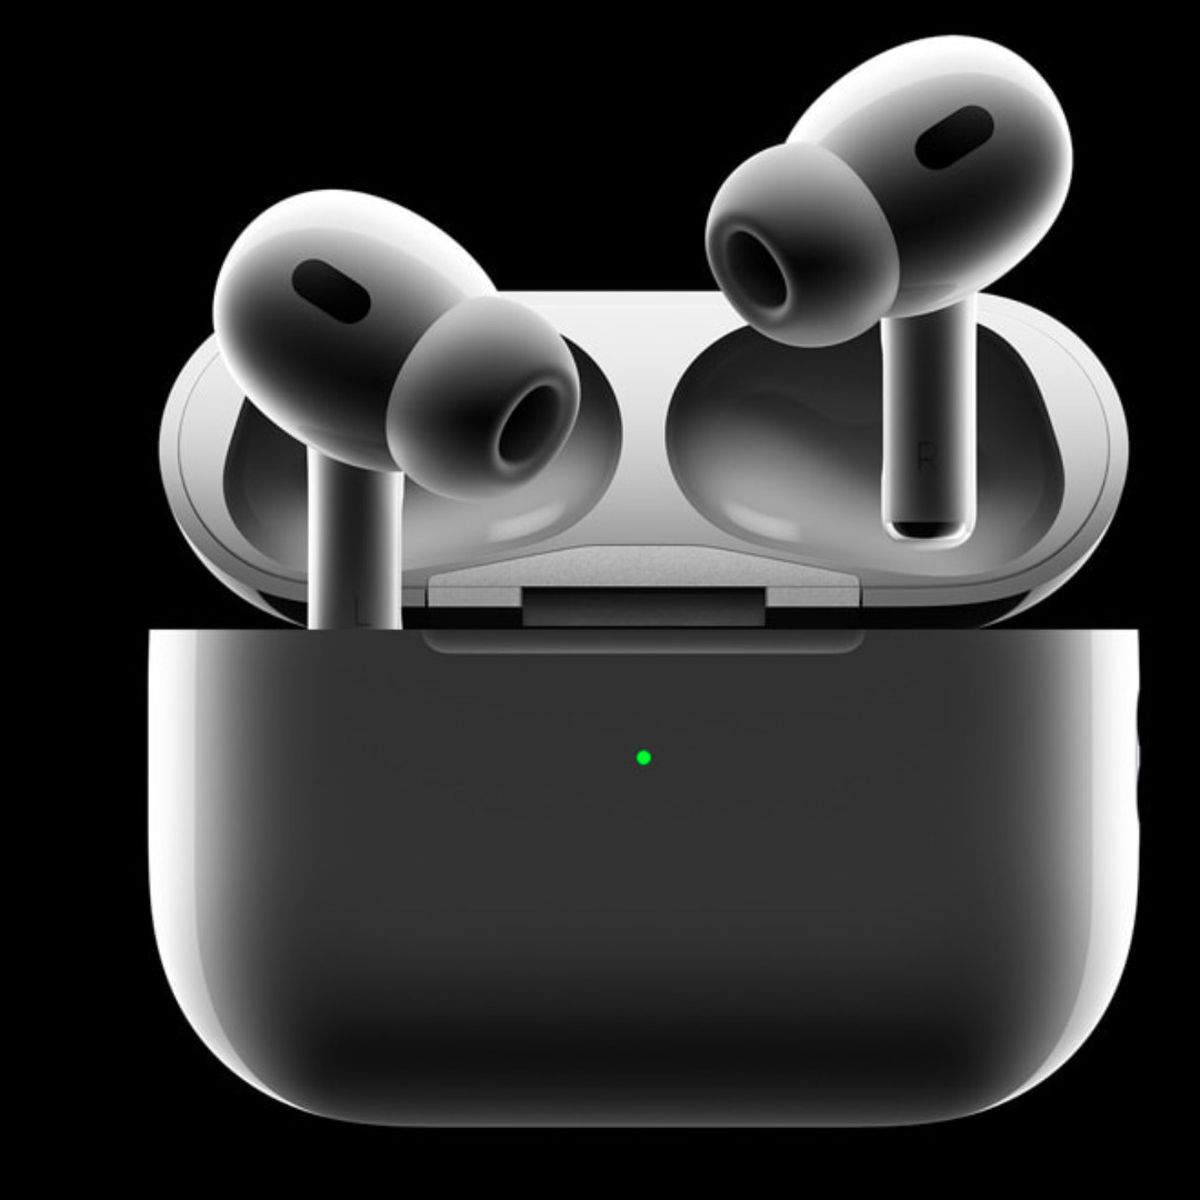 New AirPods Pro Do Not Support Lossless Apple Music - MacRumors